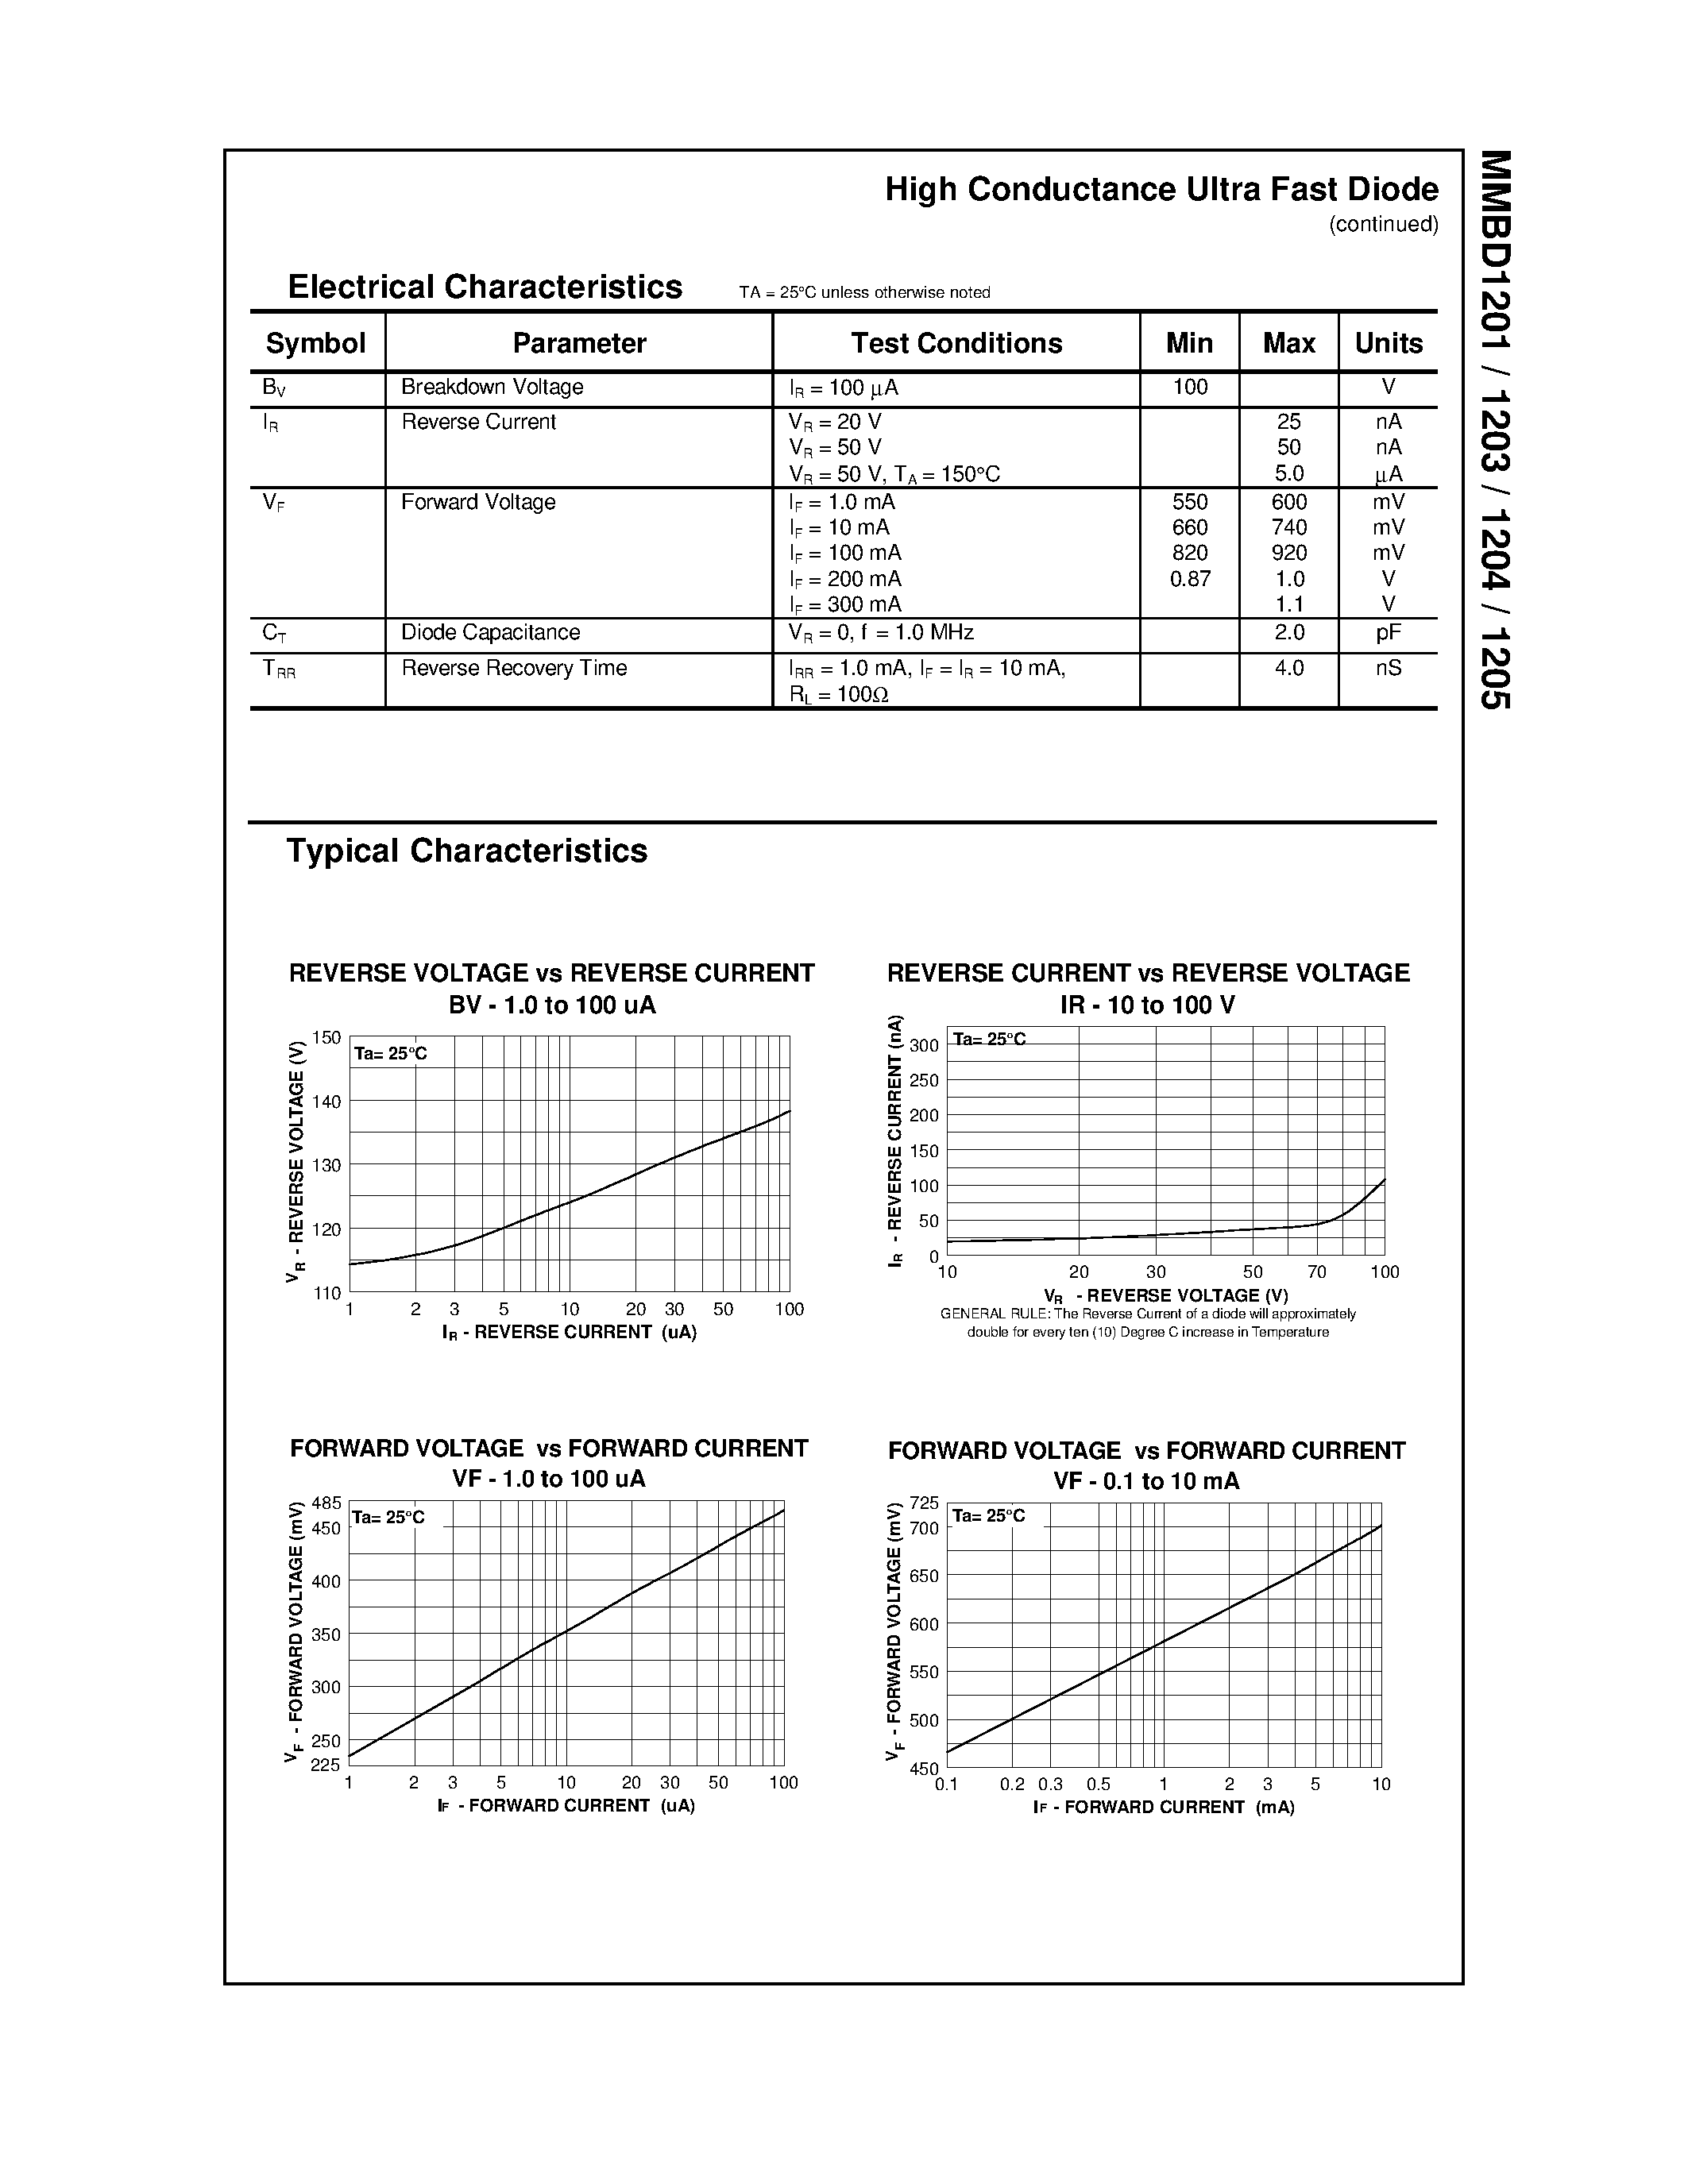 Datasheet MMBD1203 - High Conductance Ultra Fast Diode page 2